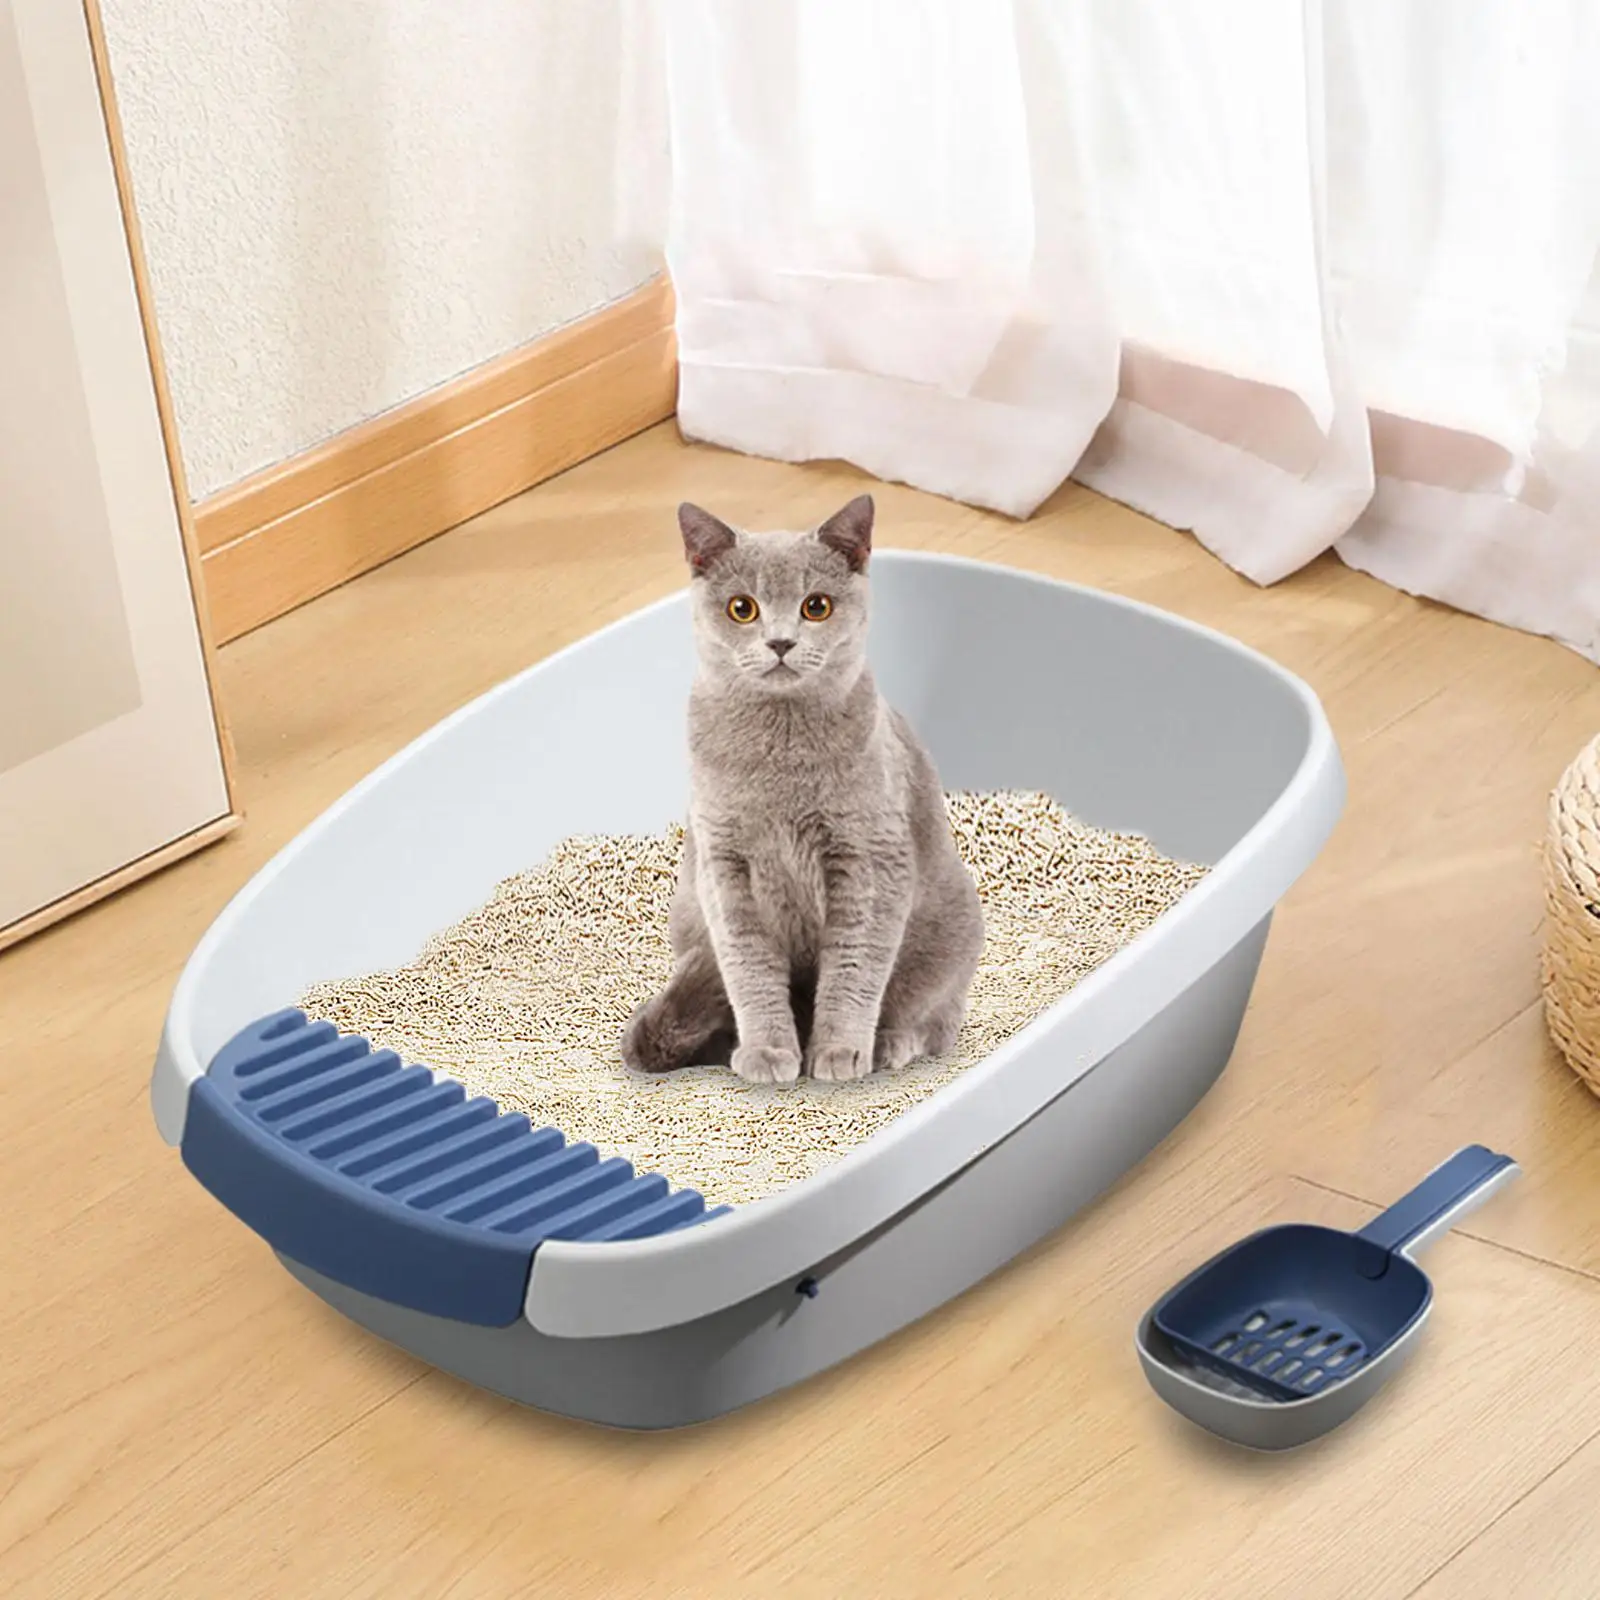 High Sided Open Cats Litter Box and Spoon Potty Toilet Anti Splashing Portable Nonstick Large Space Splashproof Pets Supplies